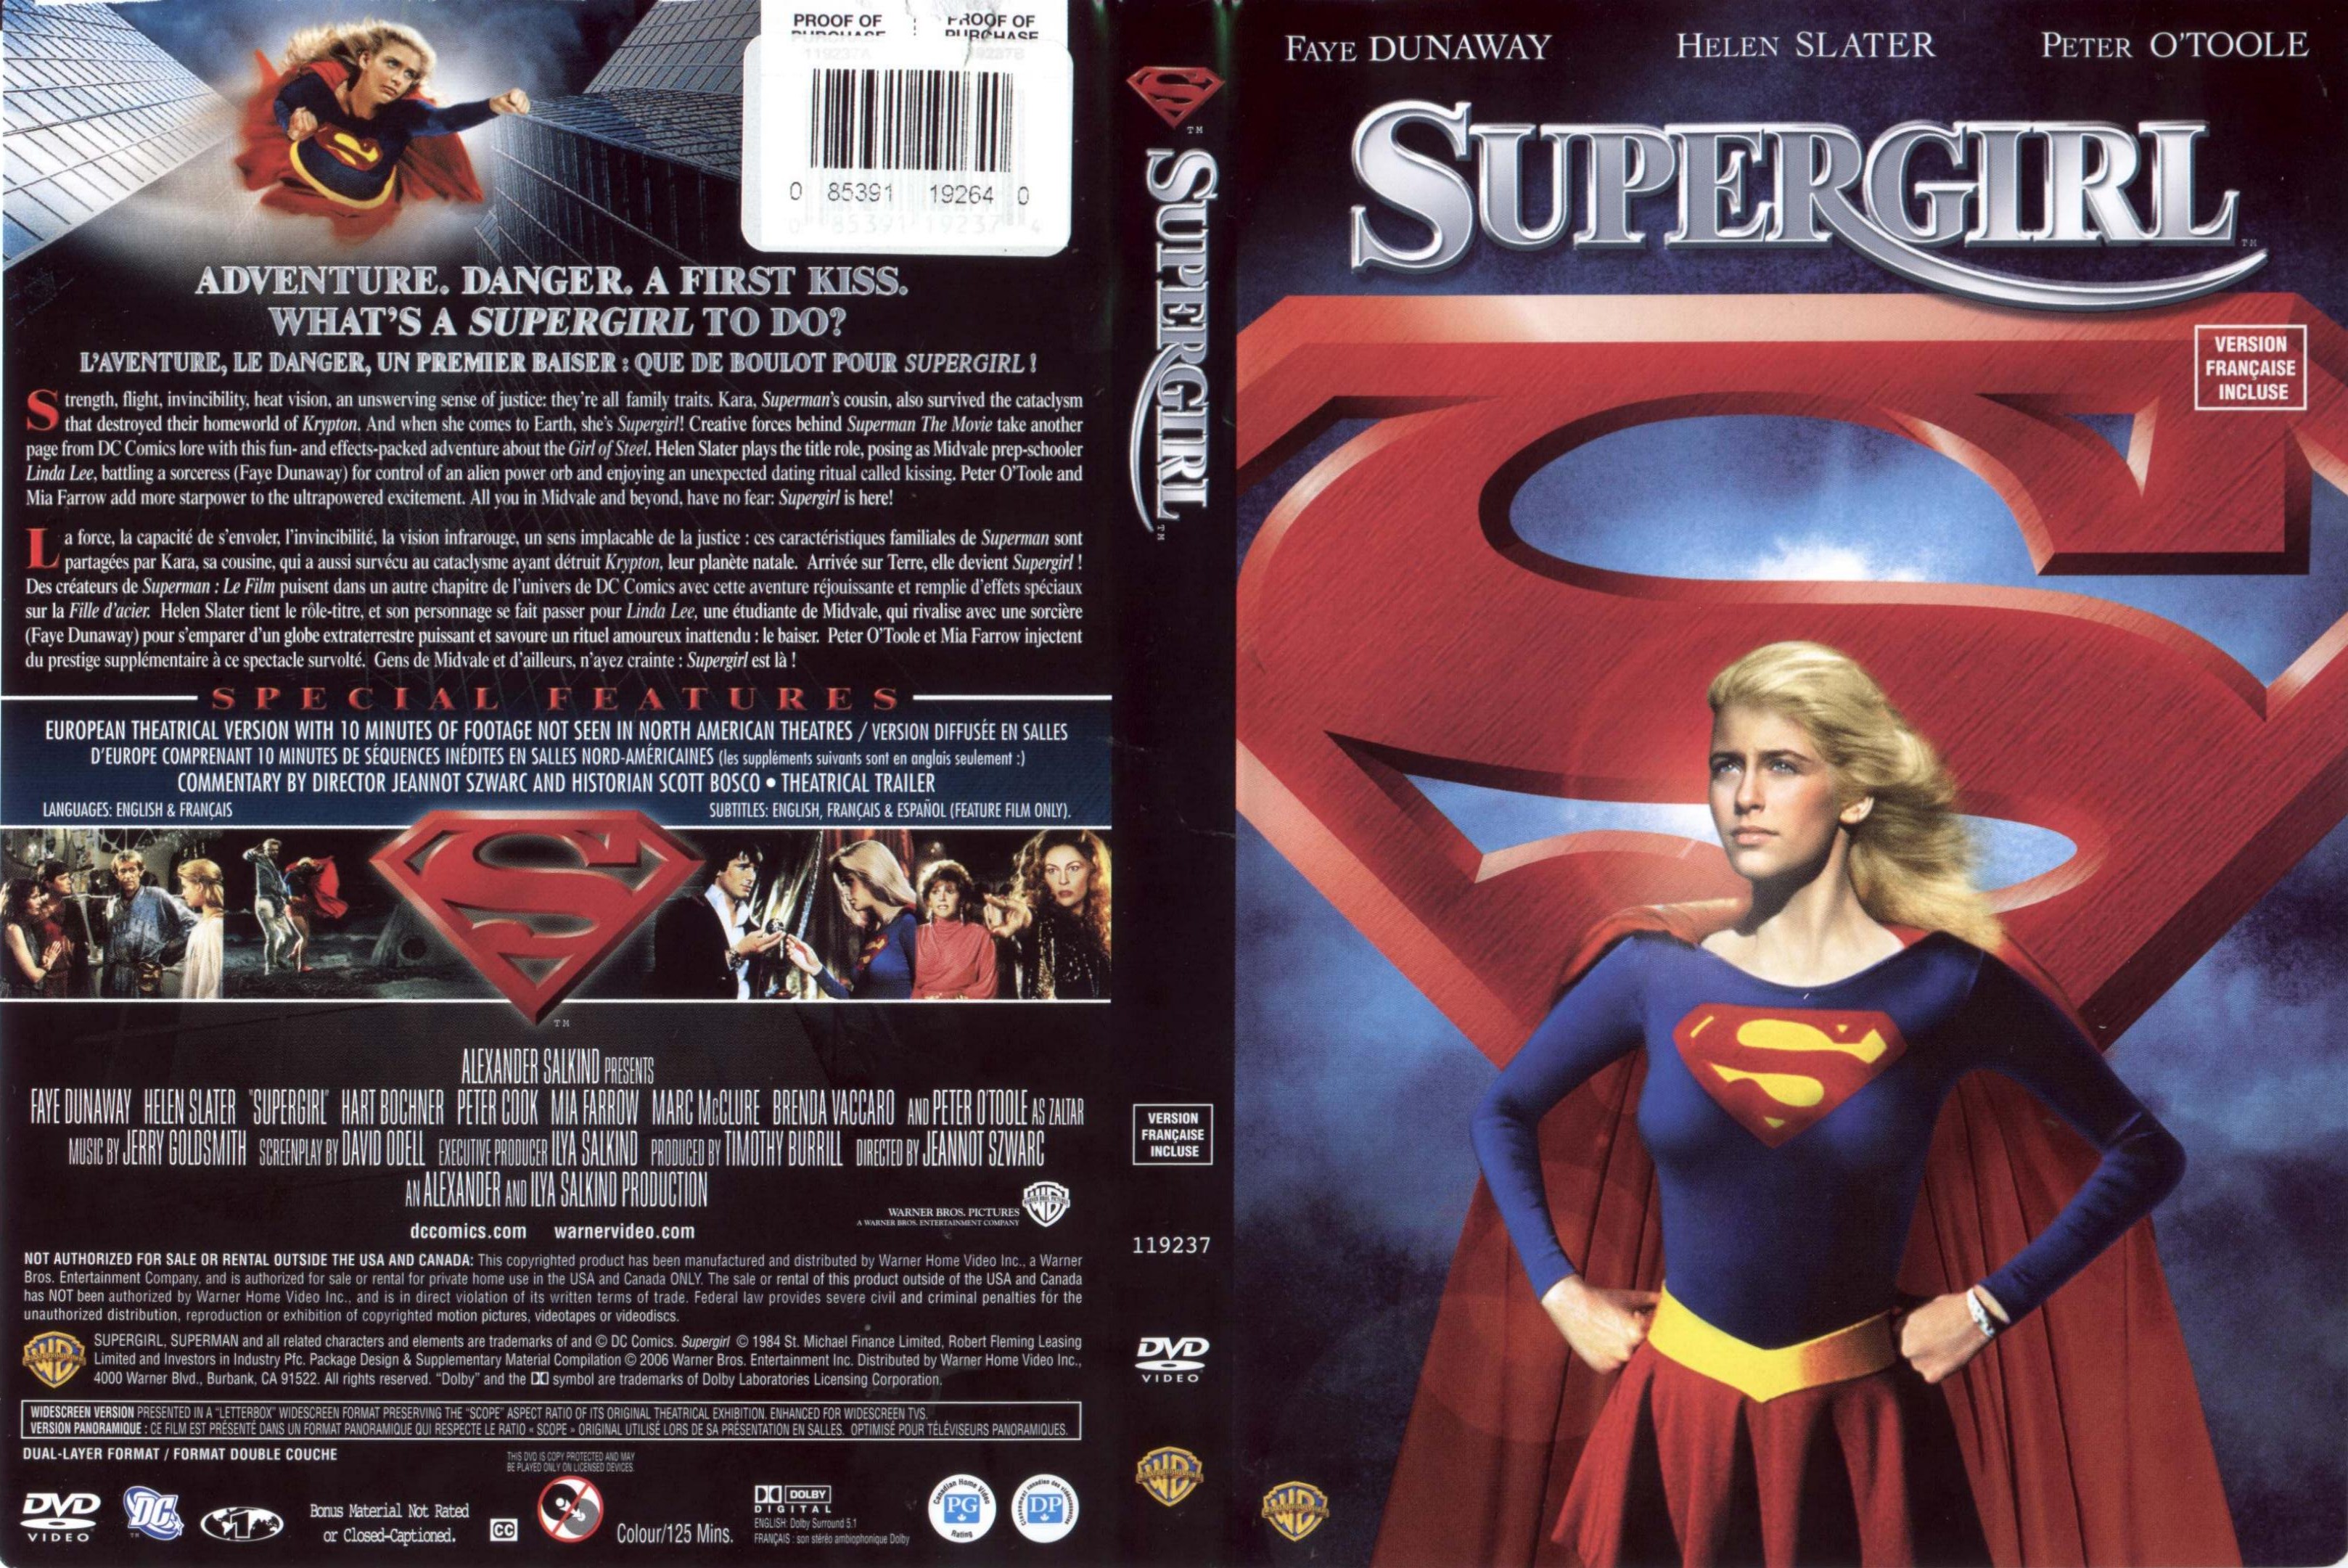 Jaquette DVD Supergirl Zone 1